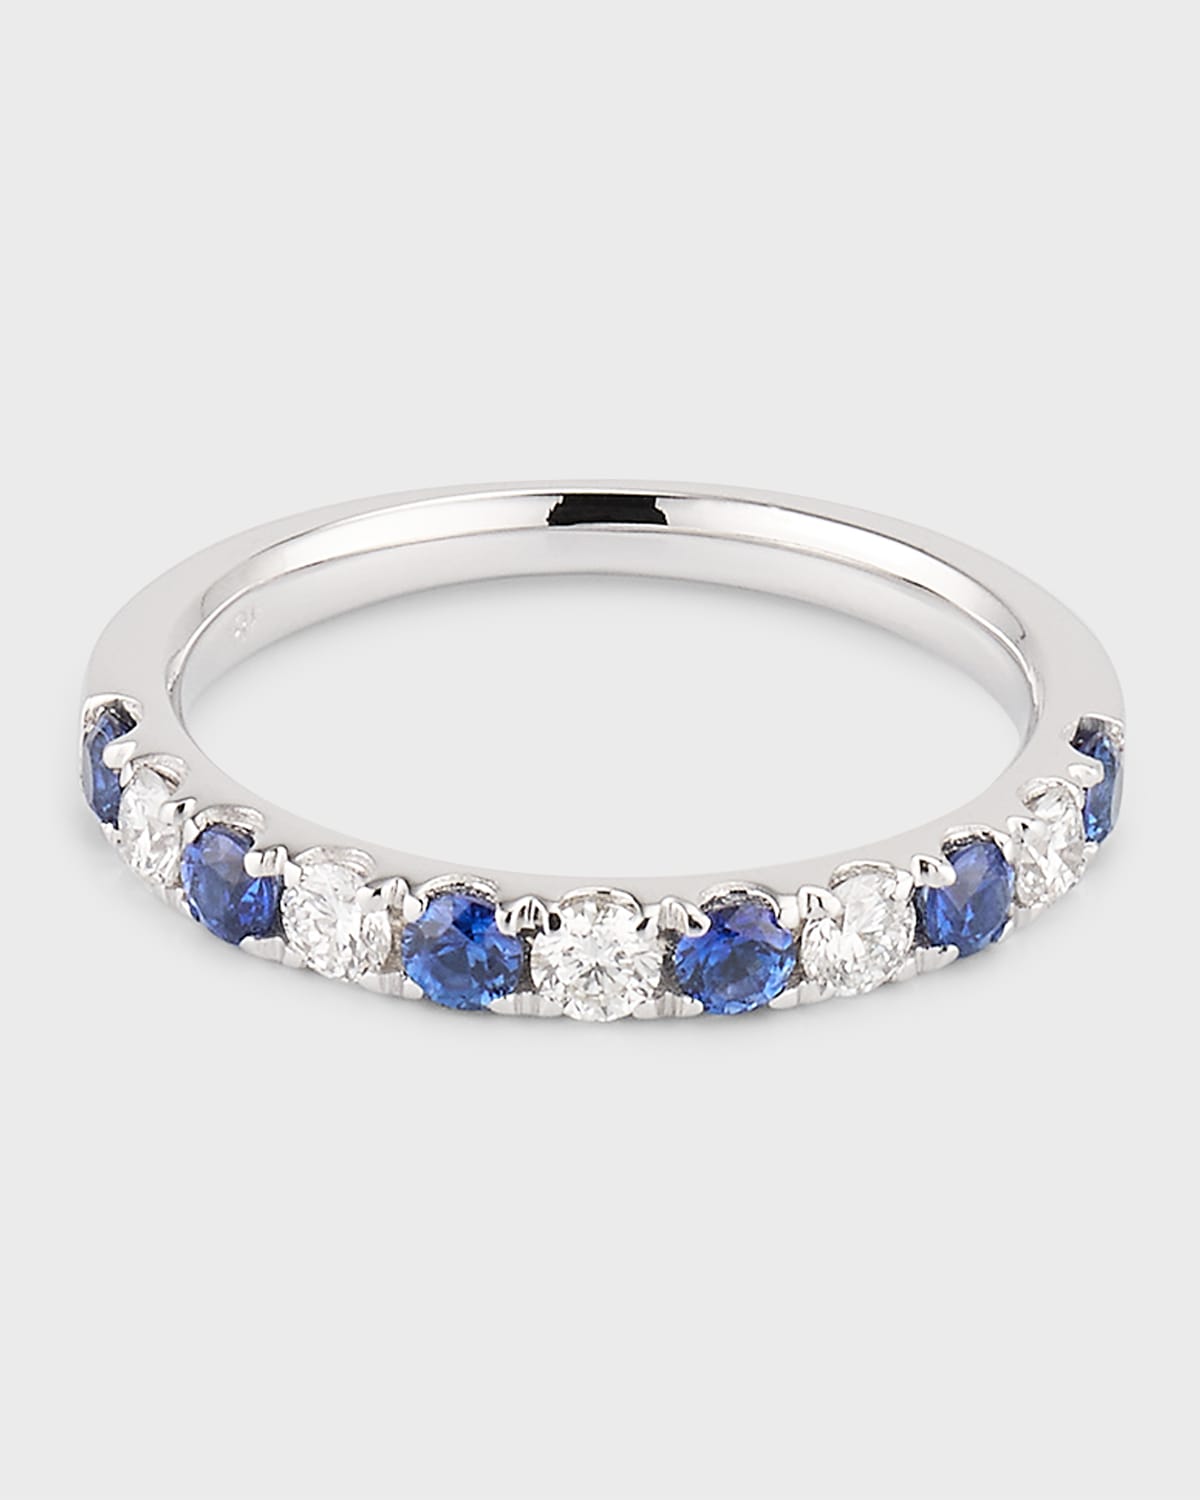 18K White Gold Ring with 2.5mm Alternating Diamonds and Blue Sapphires, Size 6